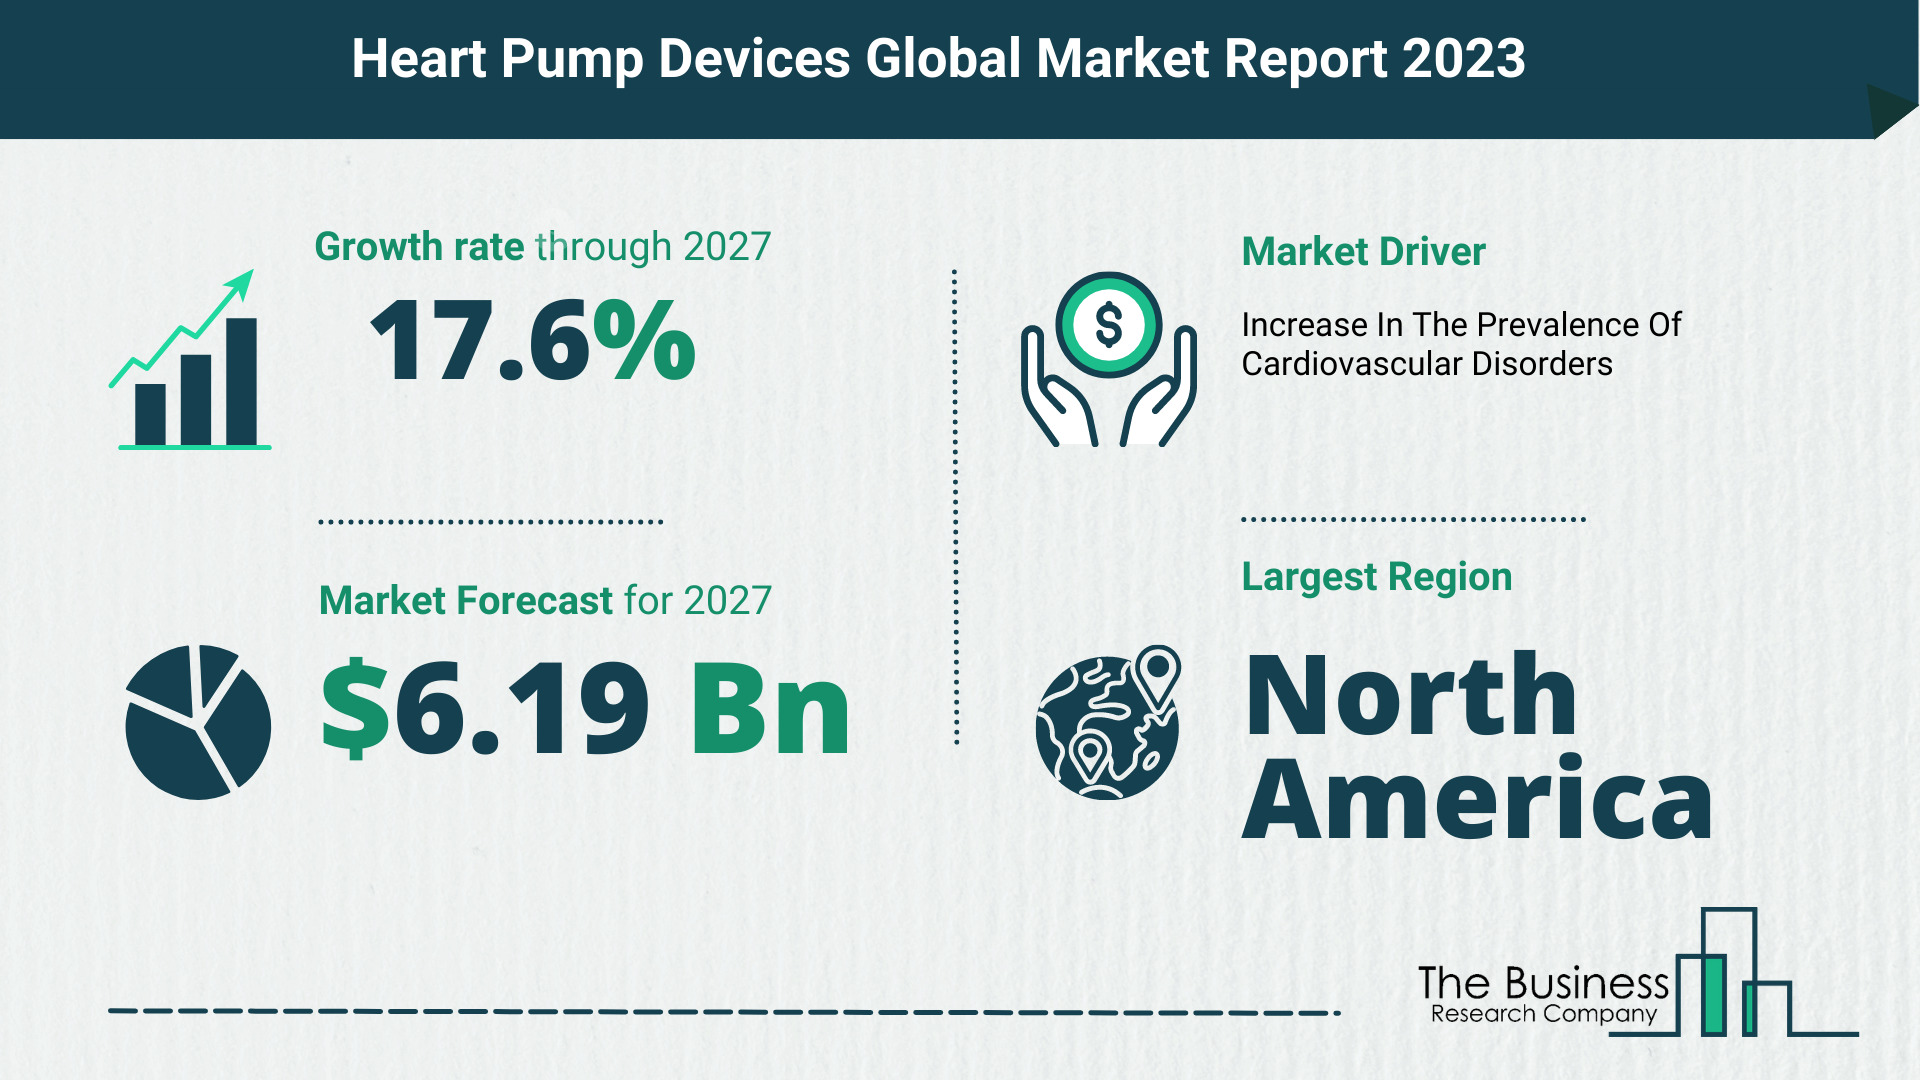 Global Heart Pump Devices Market Opportunities And Strategies 2023